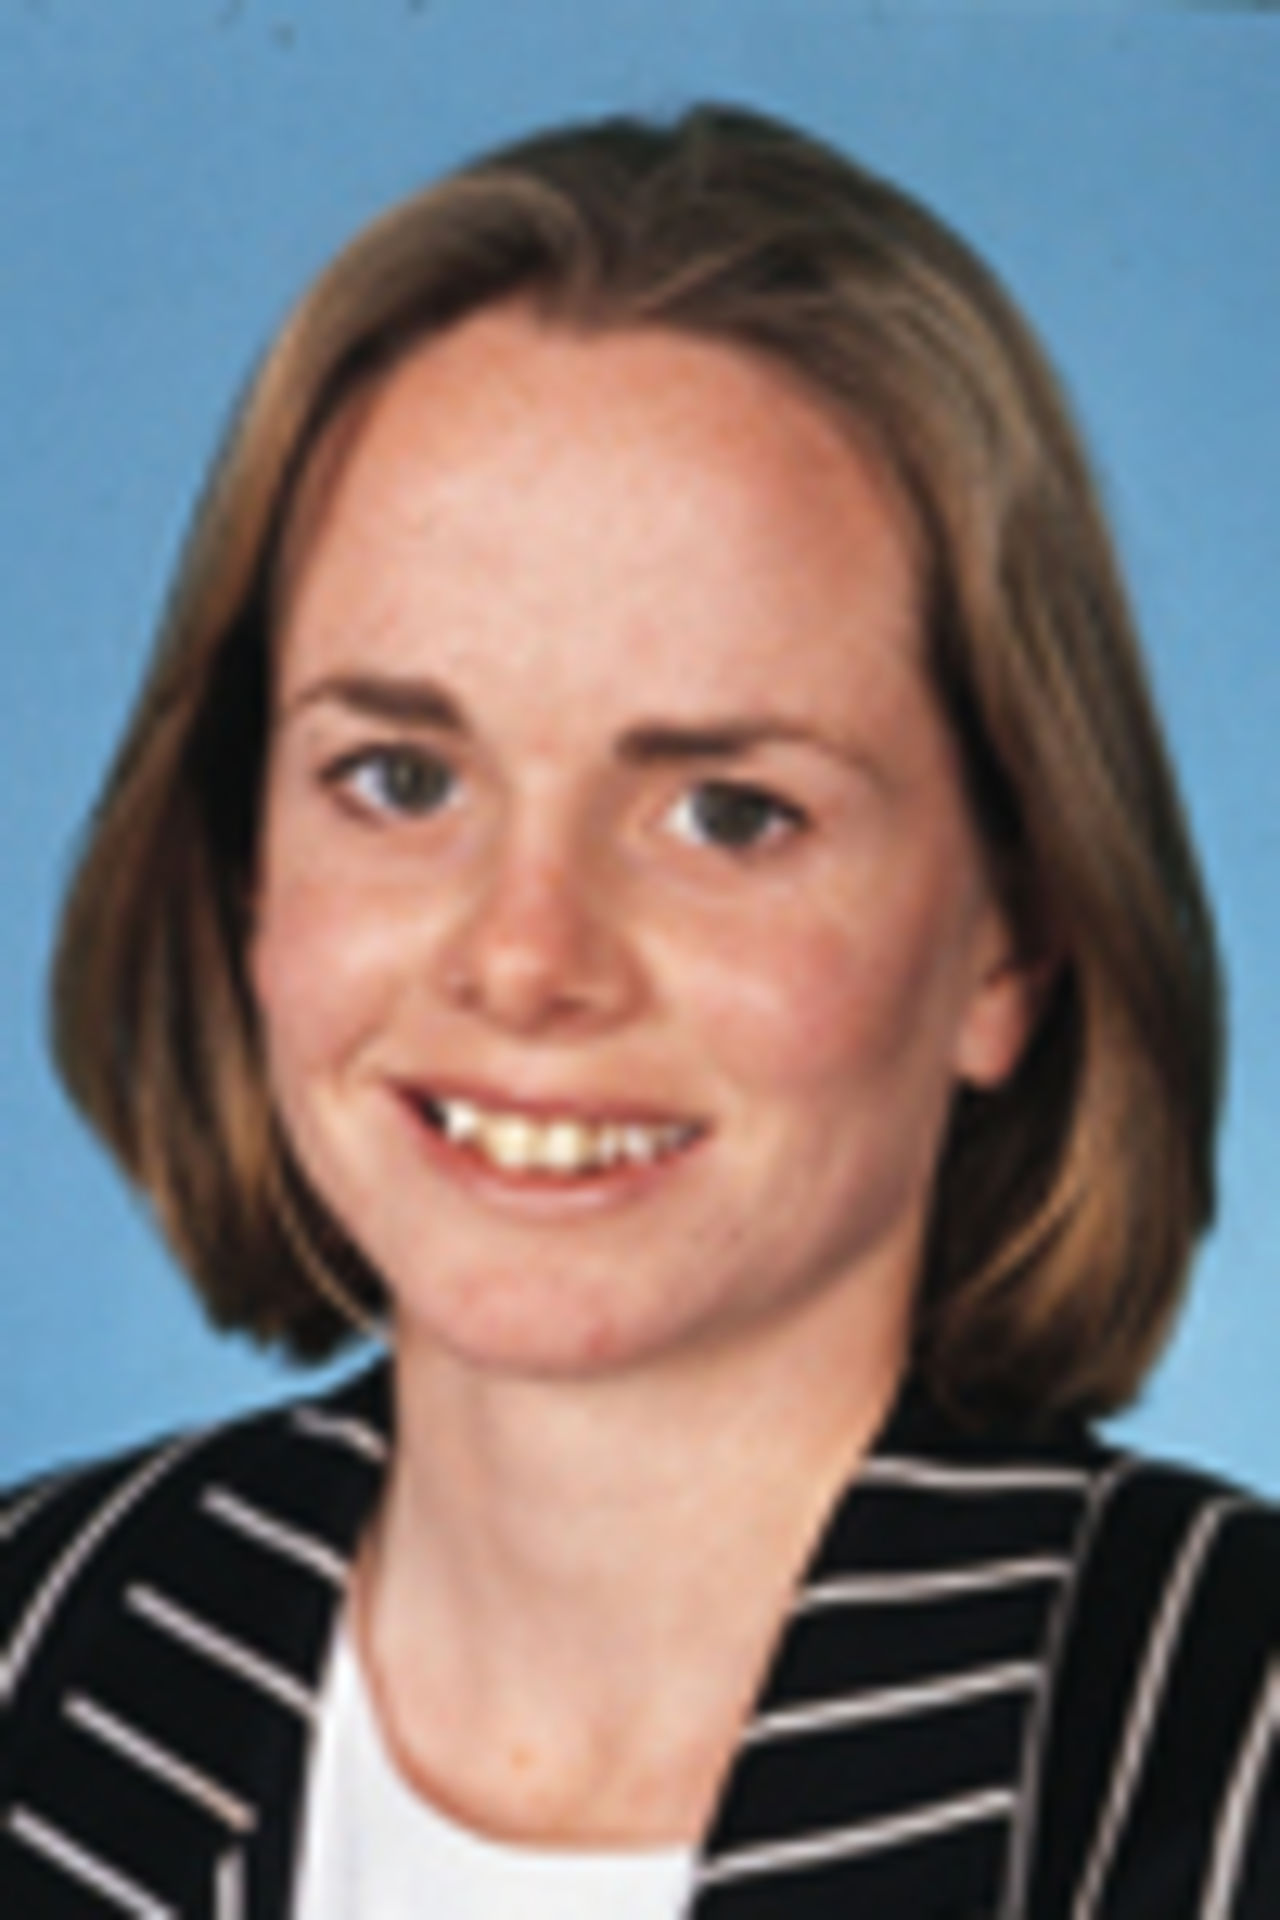 Portrait of Donna Trow, New Zealand women's player in the 1998/99 season.